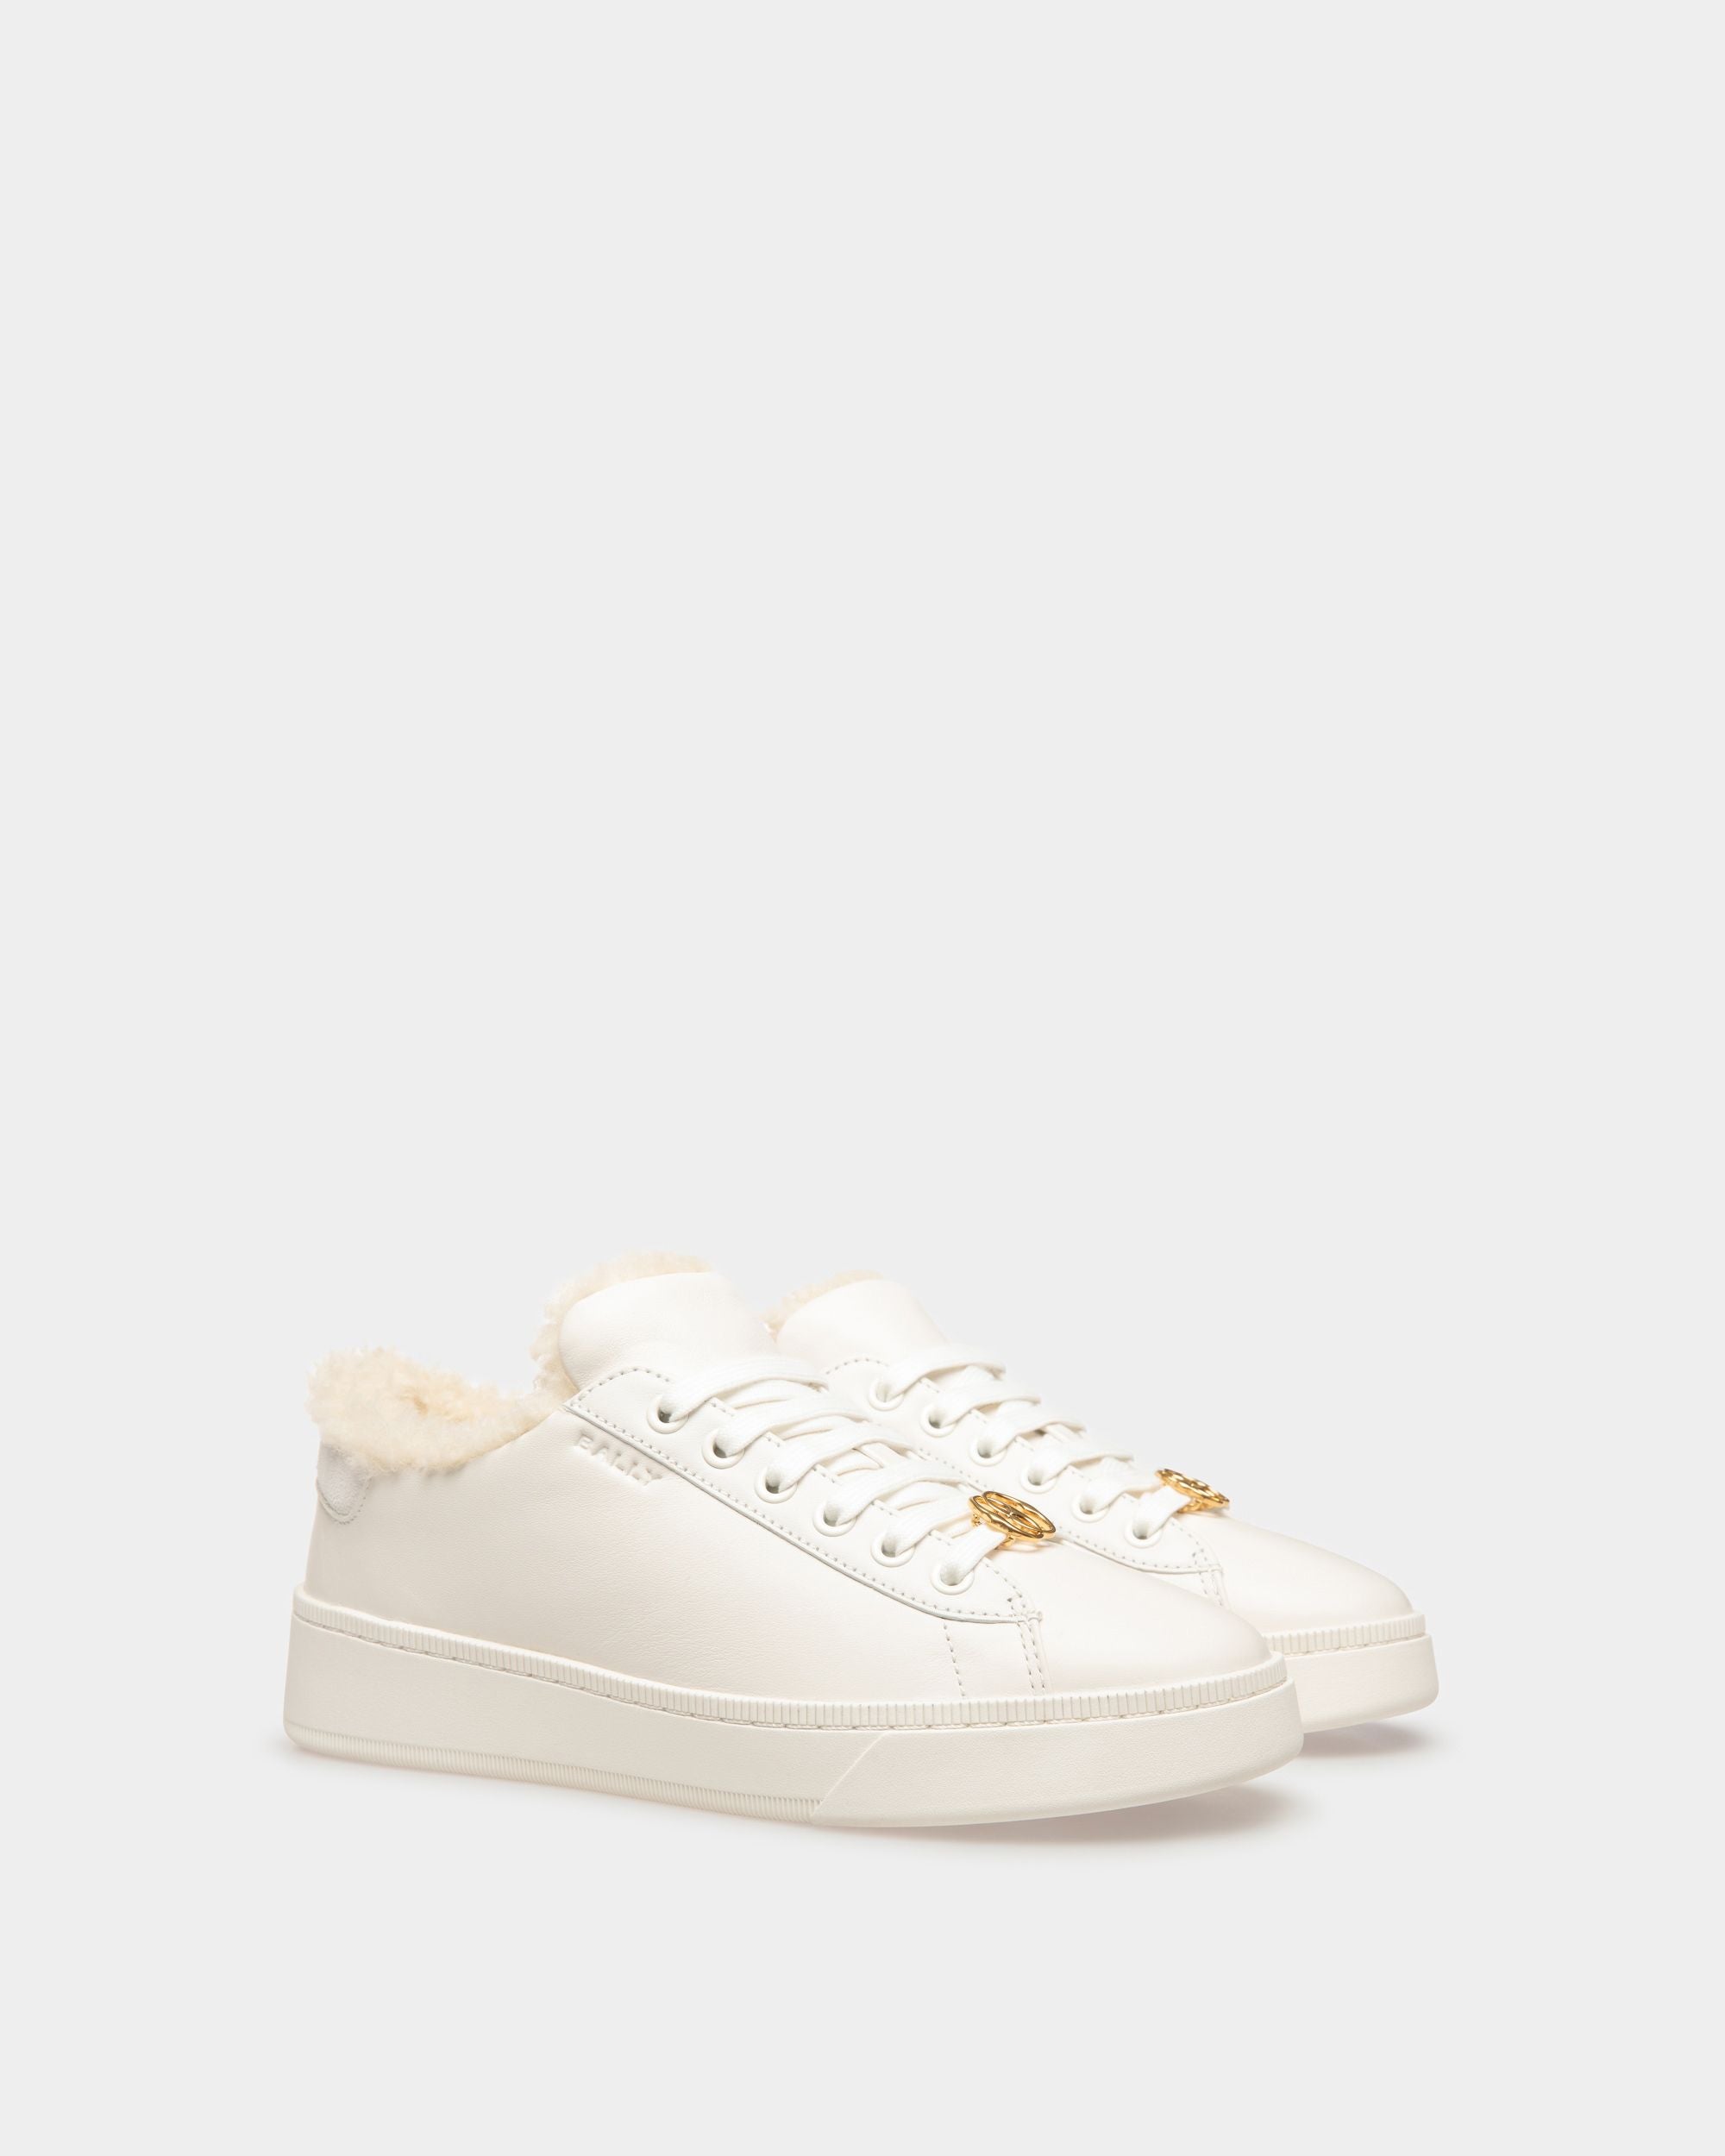 Ryver | Women's Sneakers | White Leather | Bally | Still Life 3/4 Front